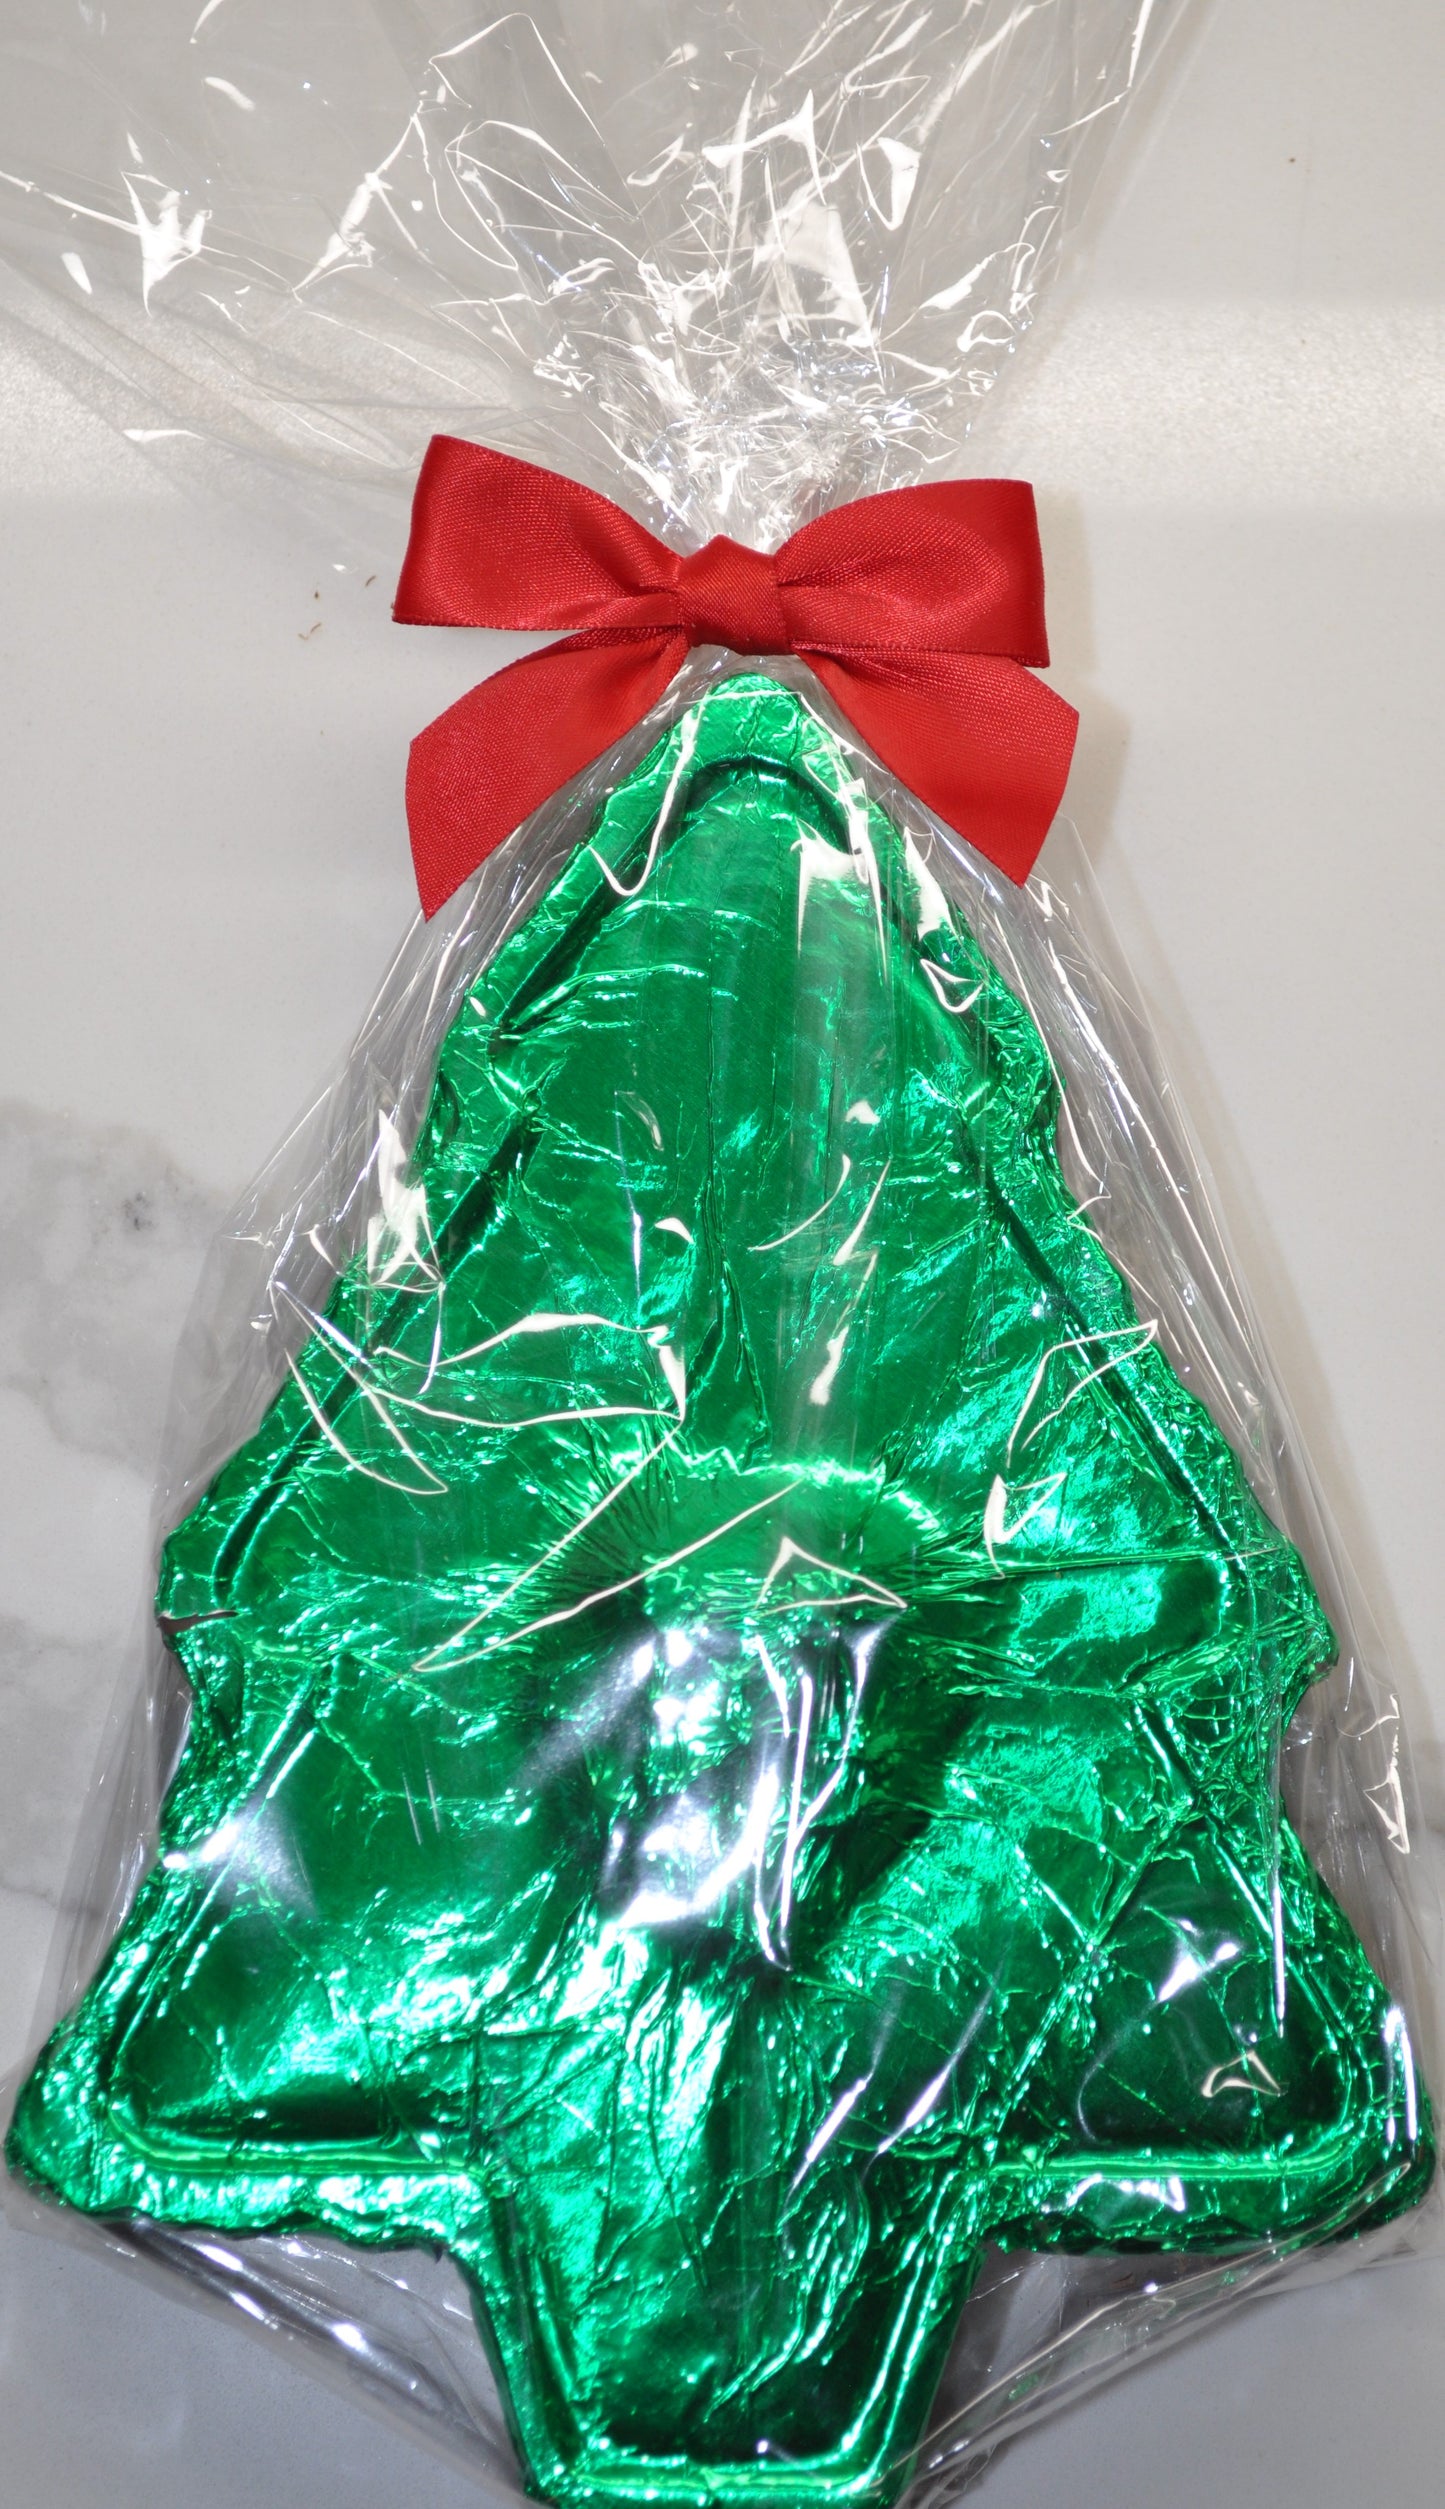 Large Christmas Tree shaped Chocolate Gift Box with Candied Orange Slices